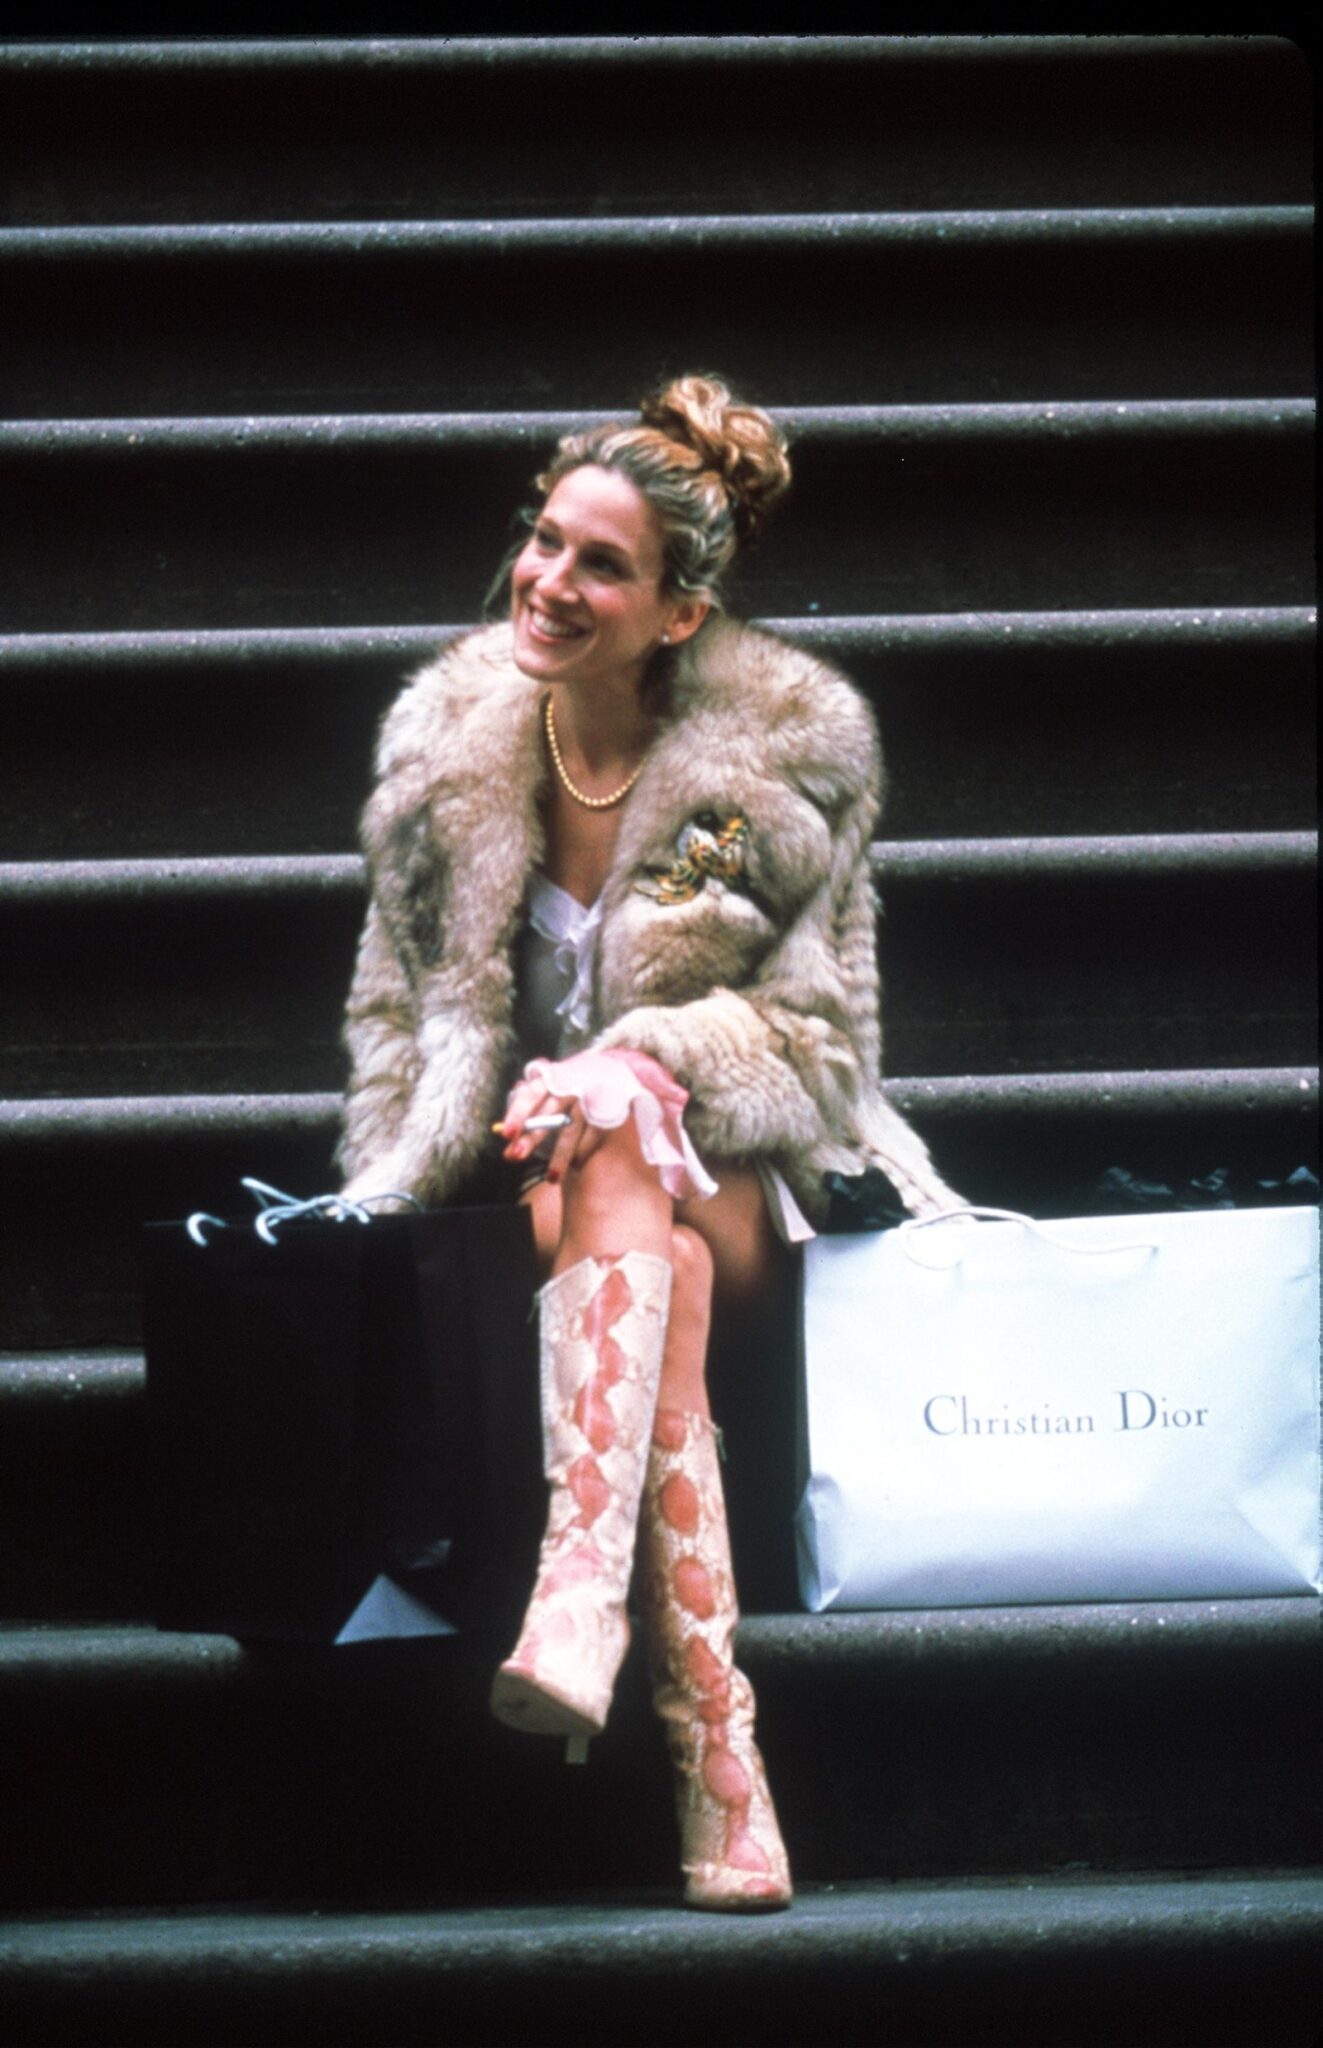 carrie bradshaw antetype